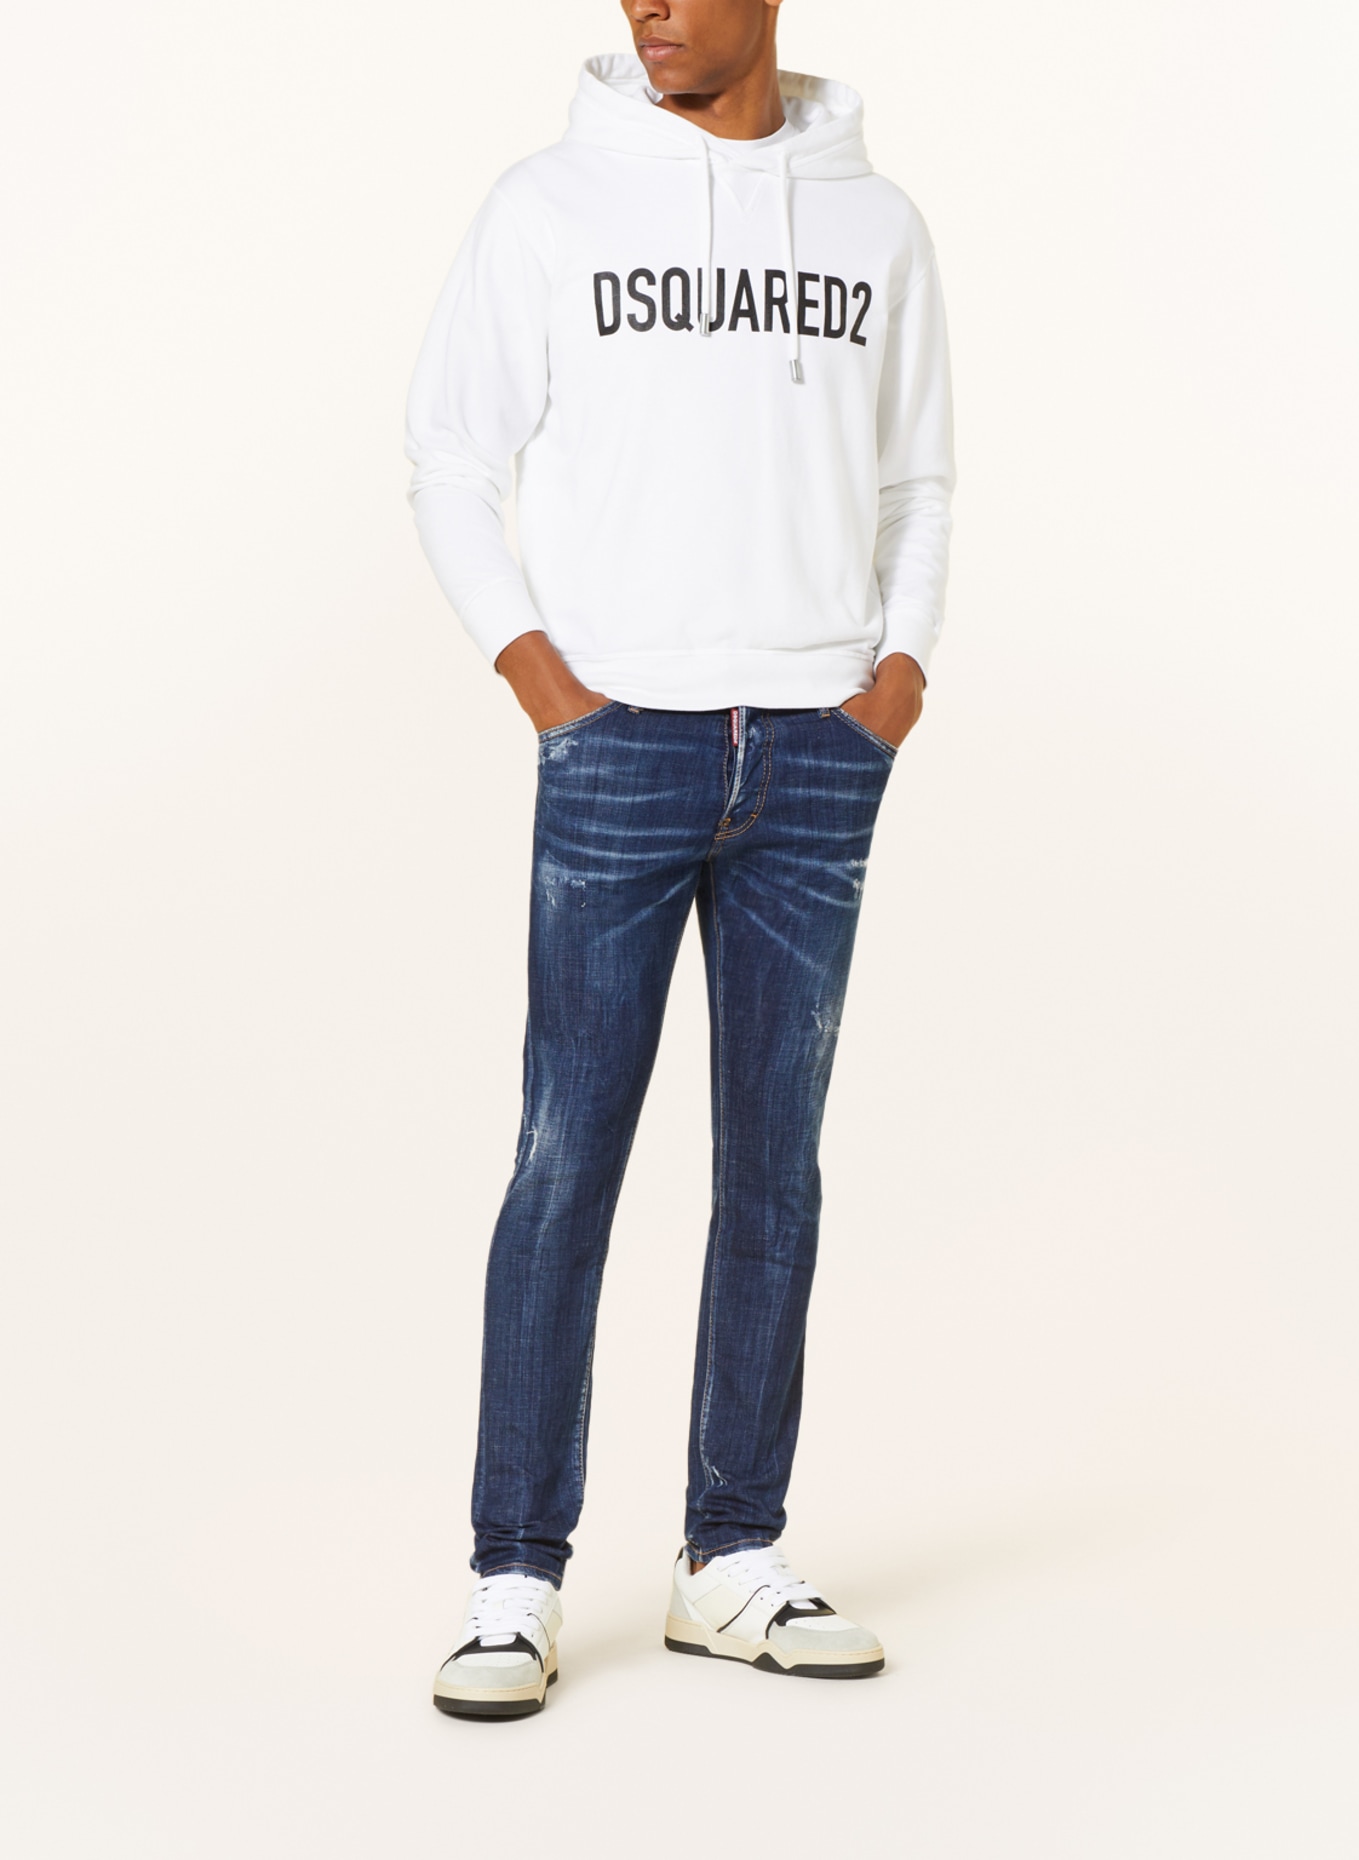 DSQUARED2 Destroyed Jeans COOL GUY Extra Slim Fit, Farbe: 470 NAVY BLUE (Bild 2)